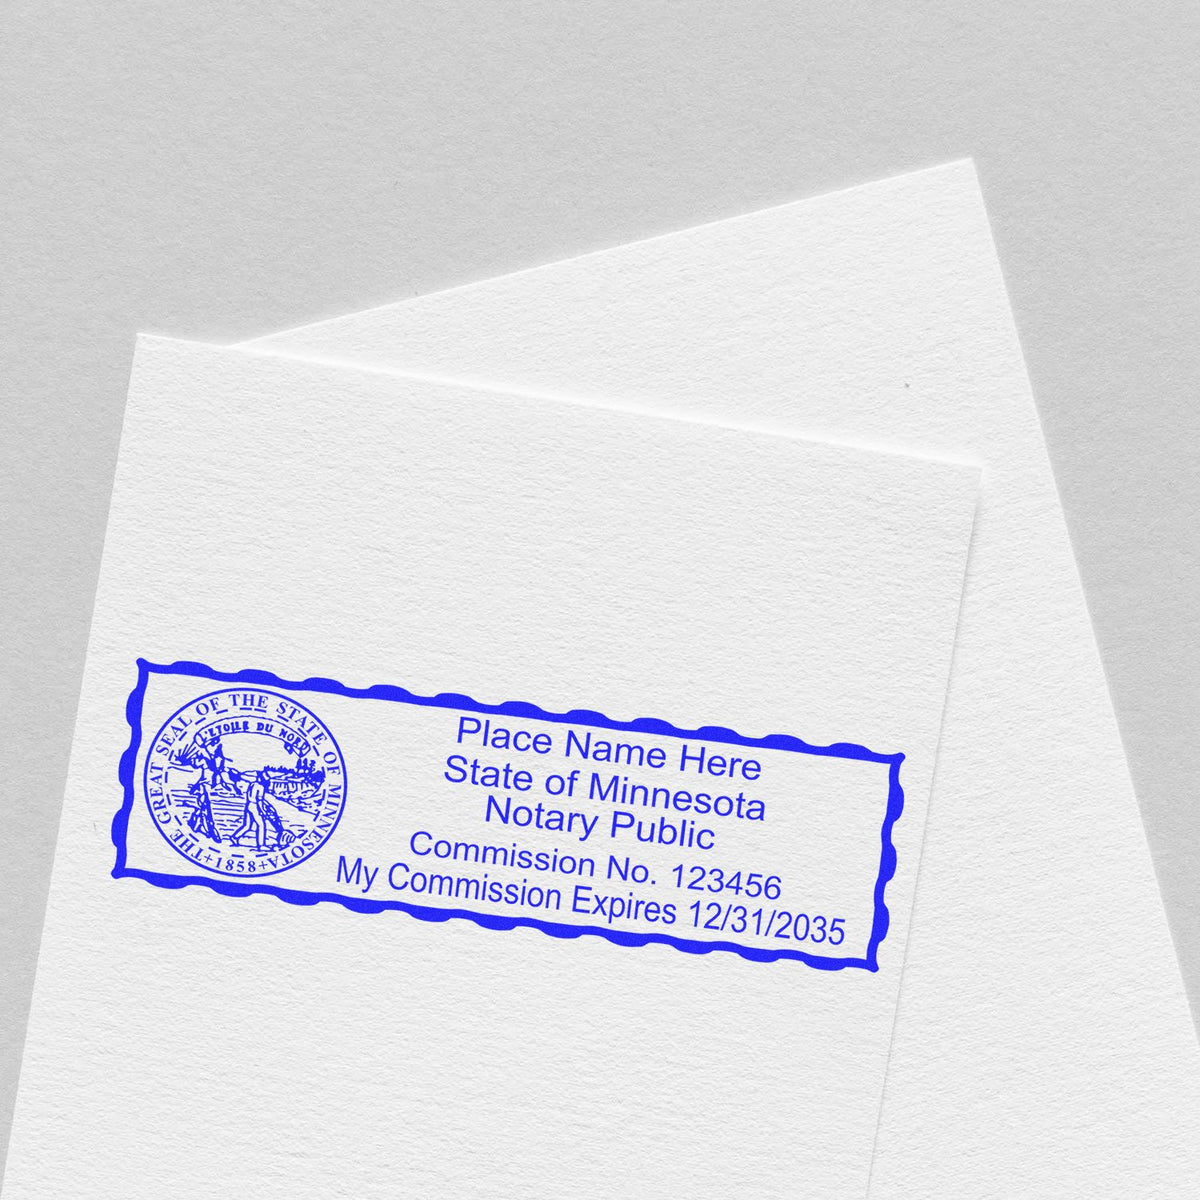 The MaxLight Premium Pre-Inked Minnesota State Seal Notarial Stamp stamp impression comes to life with a crisp, detailed photo on paper - showcasing true professional quality.